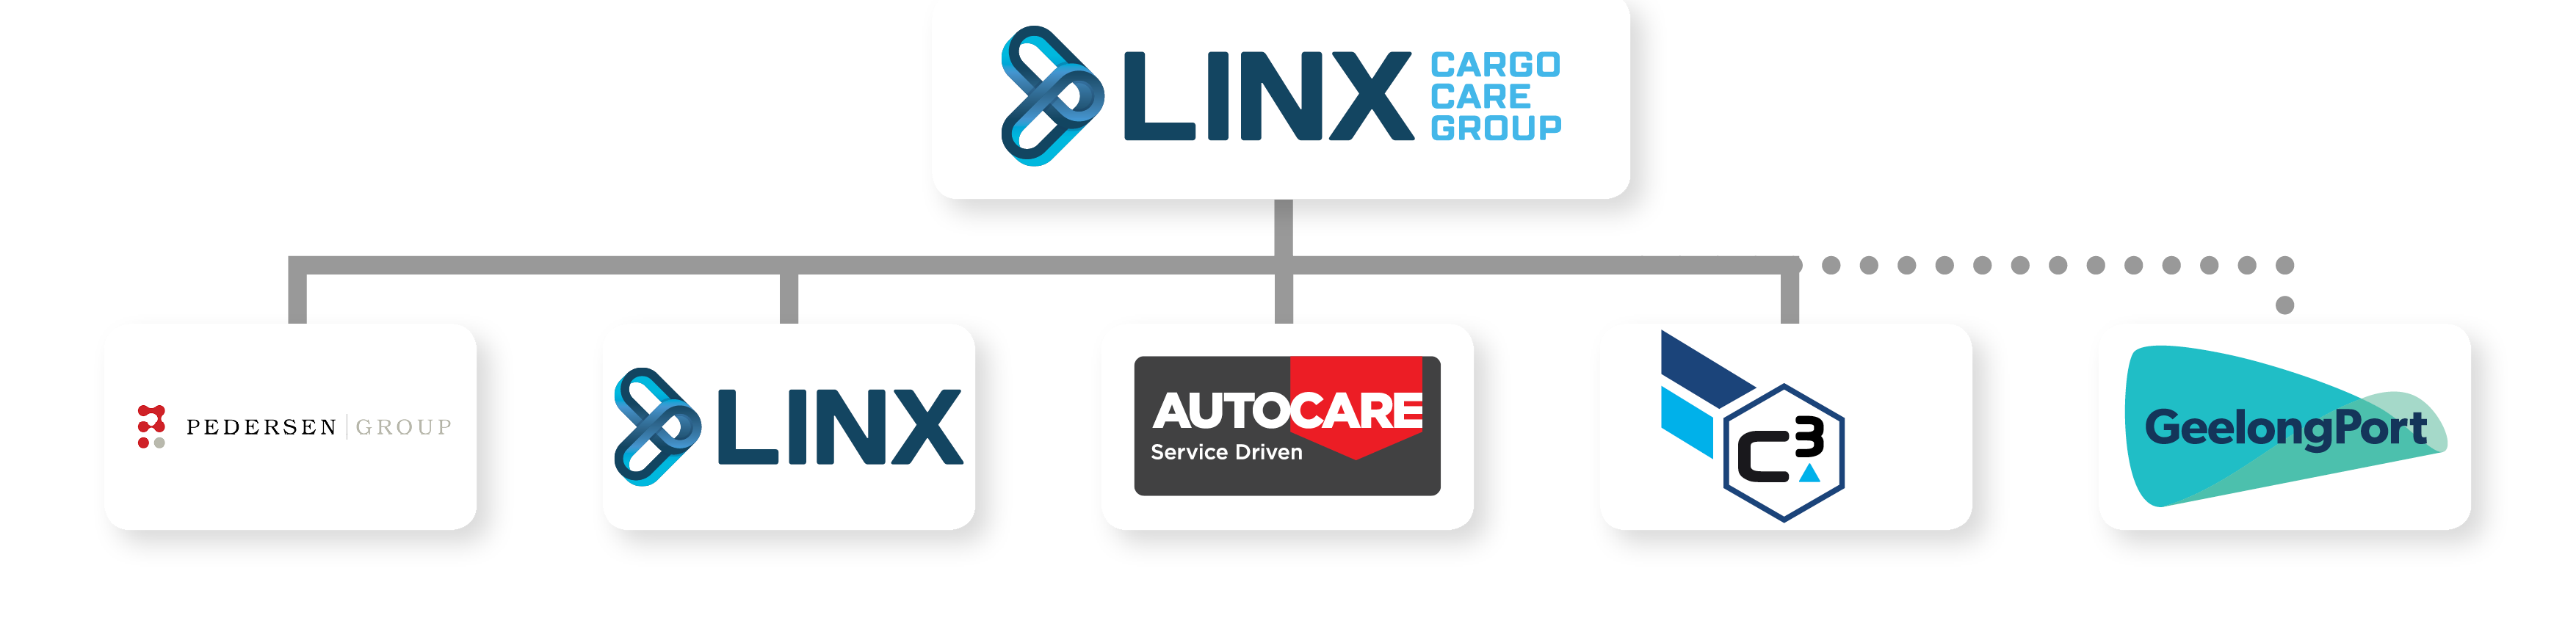 LINX Cargo Care Group structure